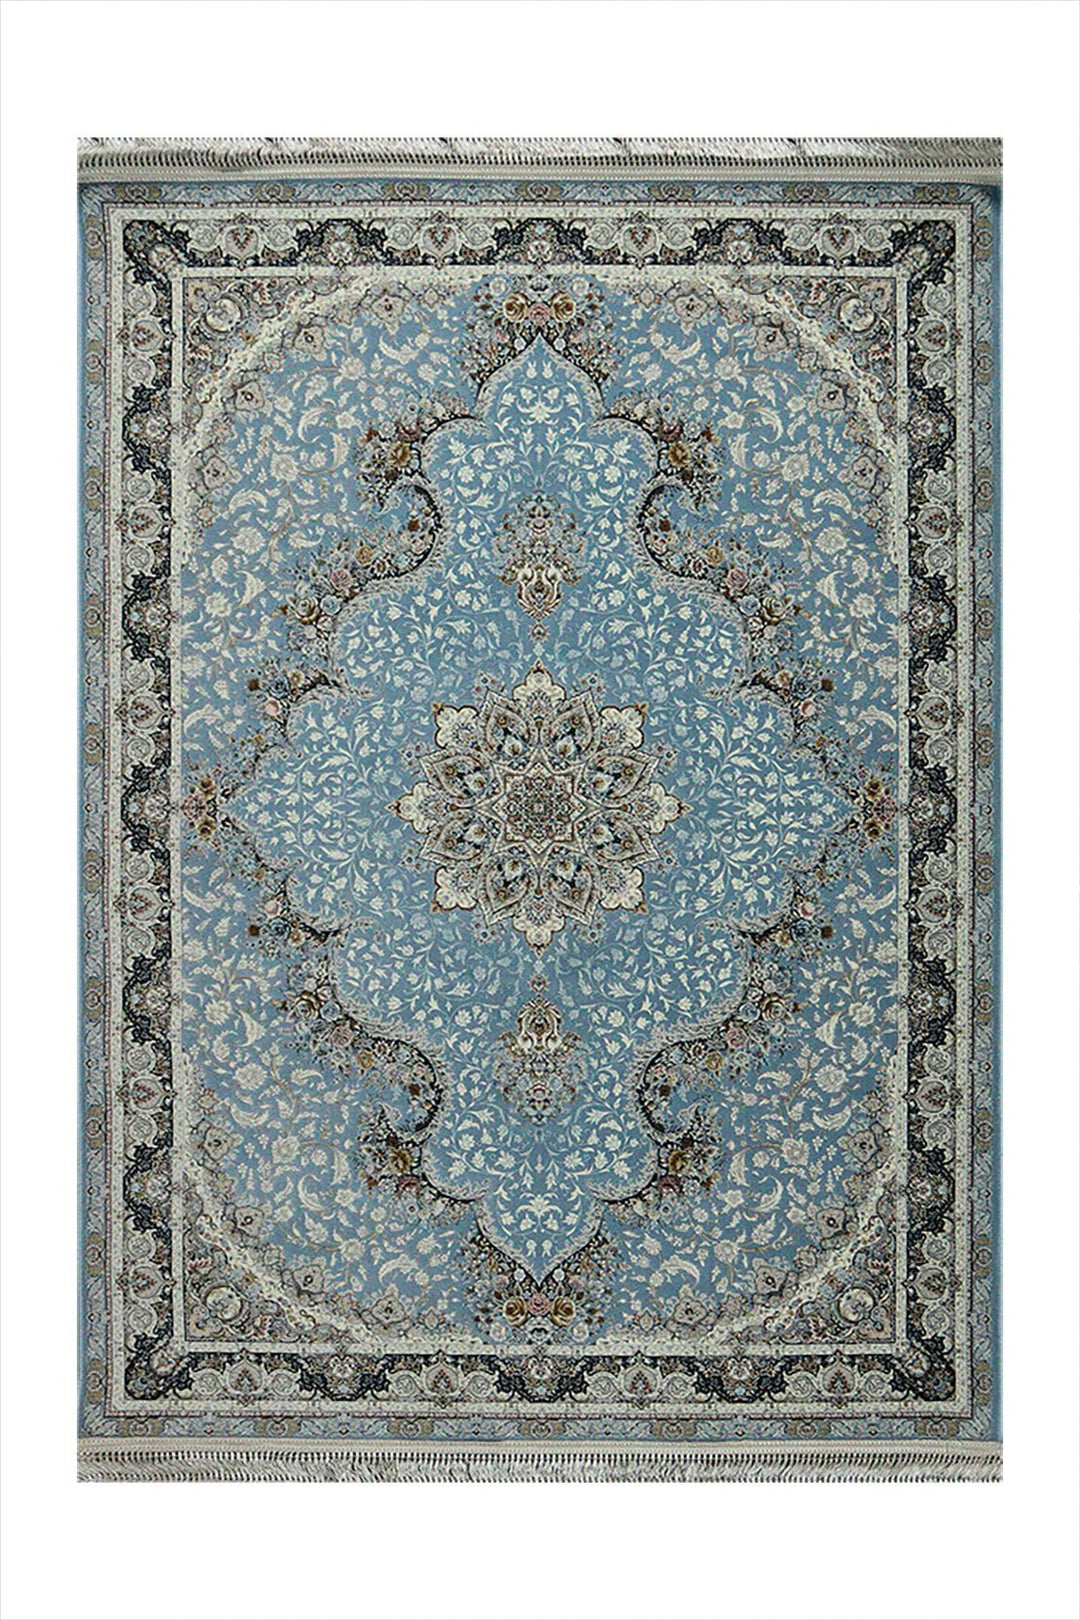 Iranian Premium Quality Authentic 1500 Rug - 3.9 x 5.5 FT - Blue - Resilient Construction for Long-Lasting Use - V Surfaces